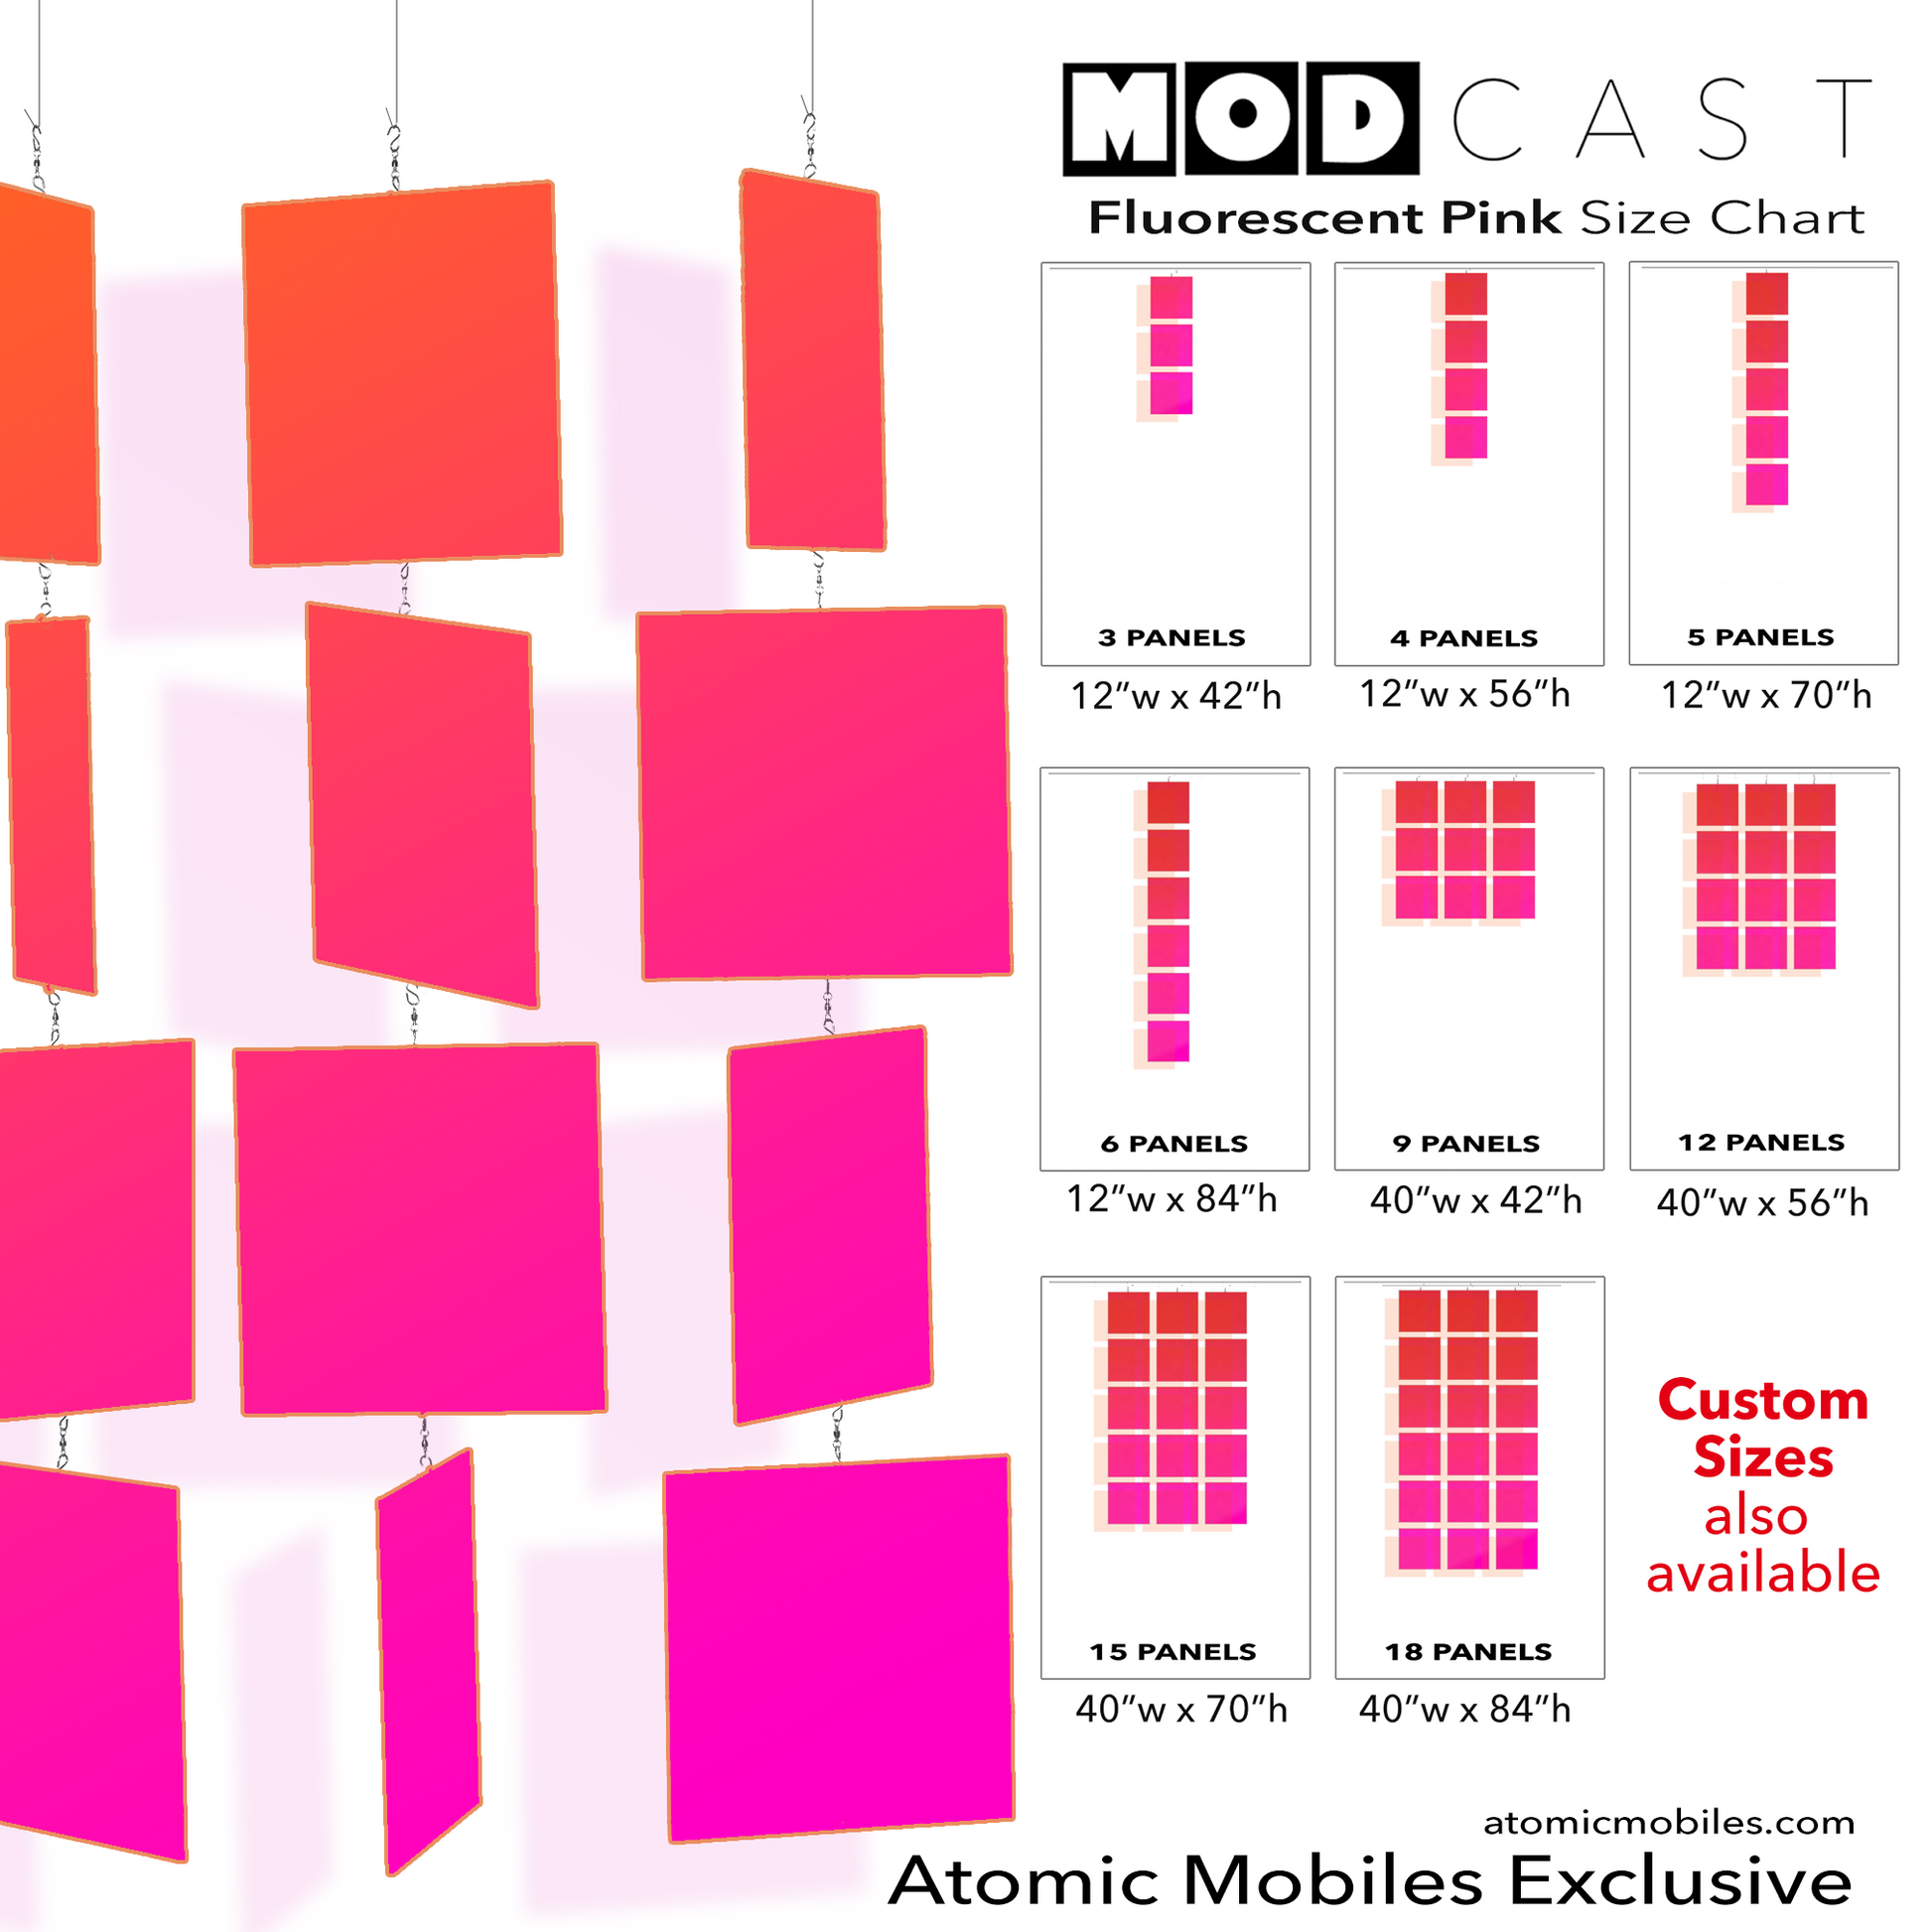 Modernist MODcast mid century modern style kinetic hanging art mobile for home decor in clear color fluorescent Hot Pink acrylic plexiglass - handmade in Los Angeles California by AtomicMobiles.com